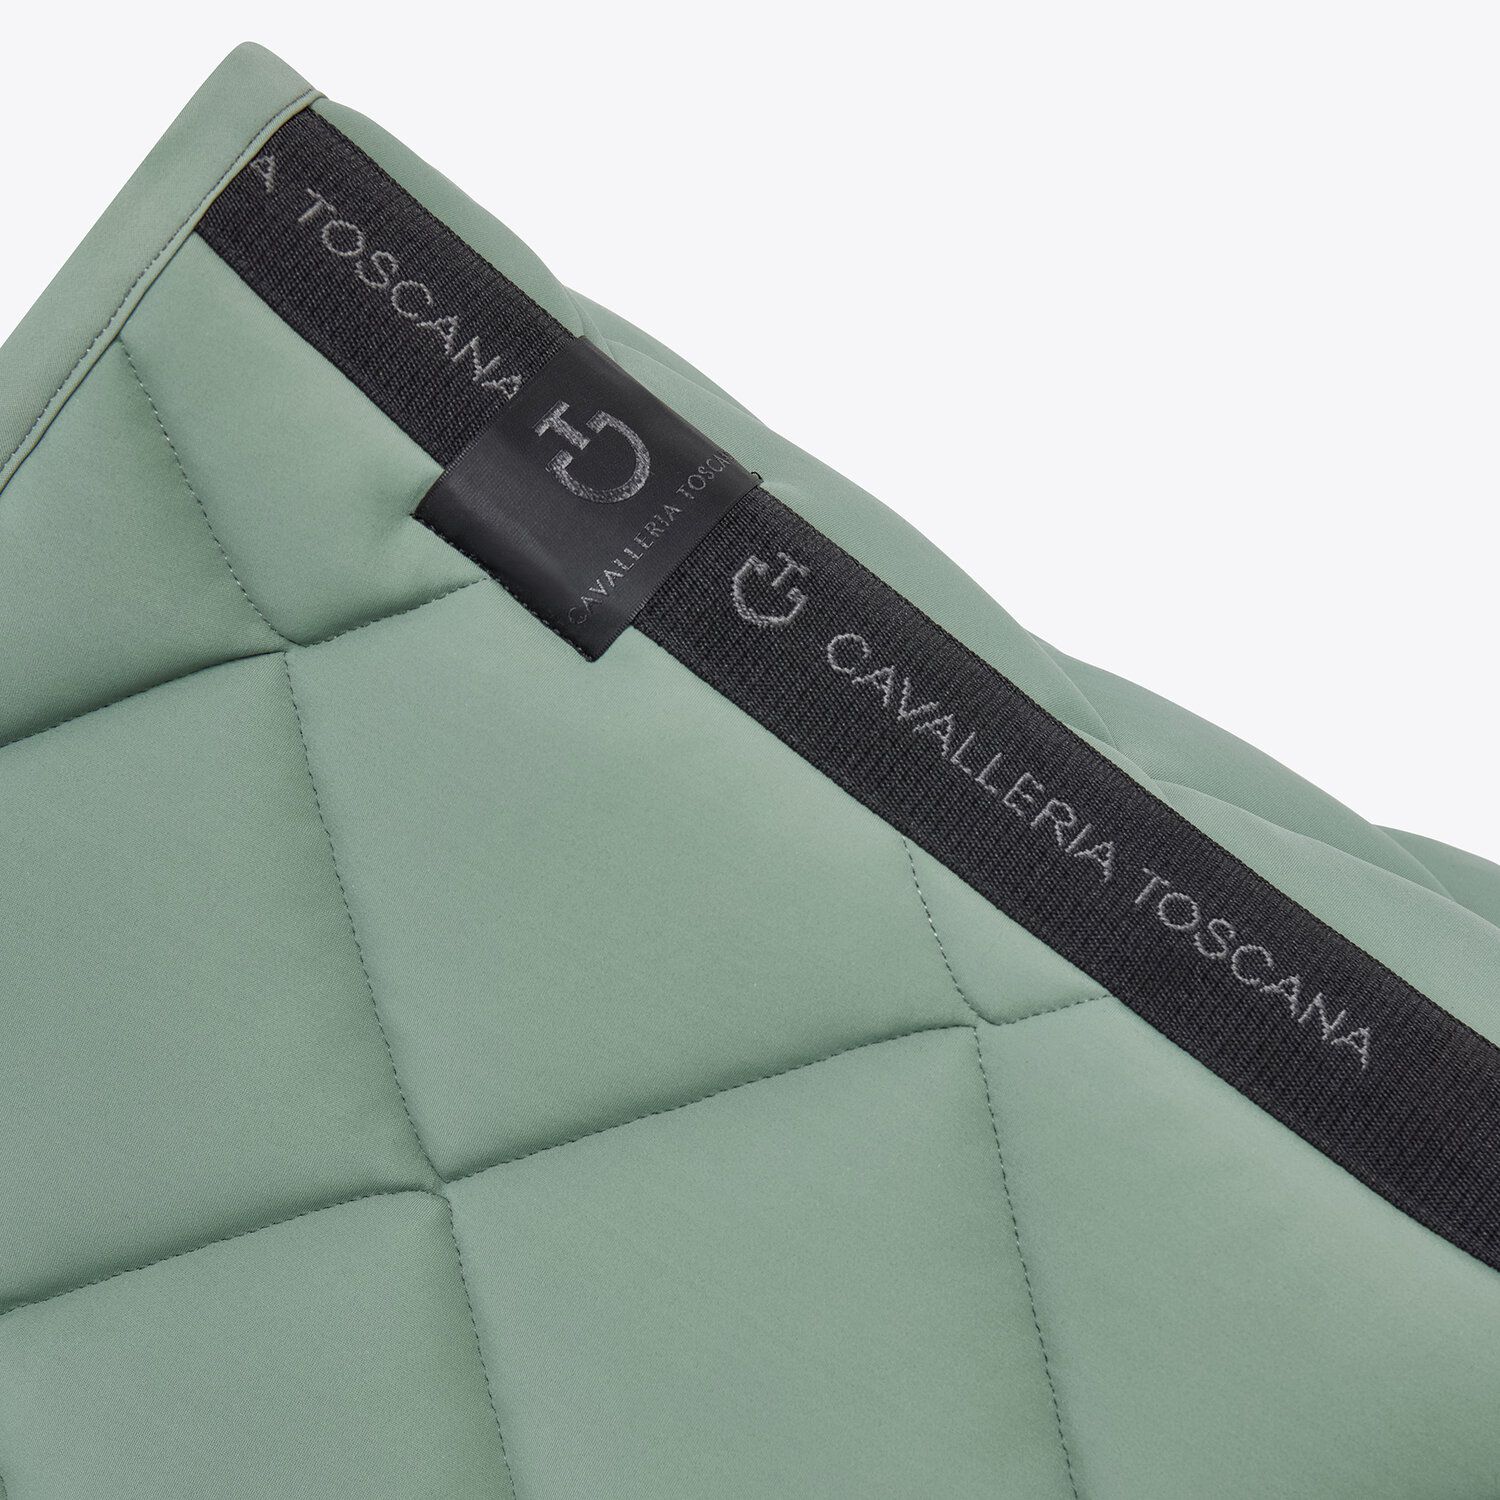 Cavalleria Toscana Dressage saddle pad in quilted cotton fabric EMERALD GREY-3